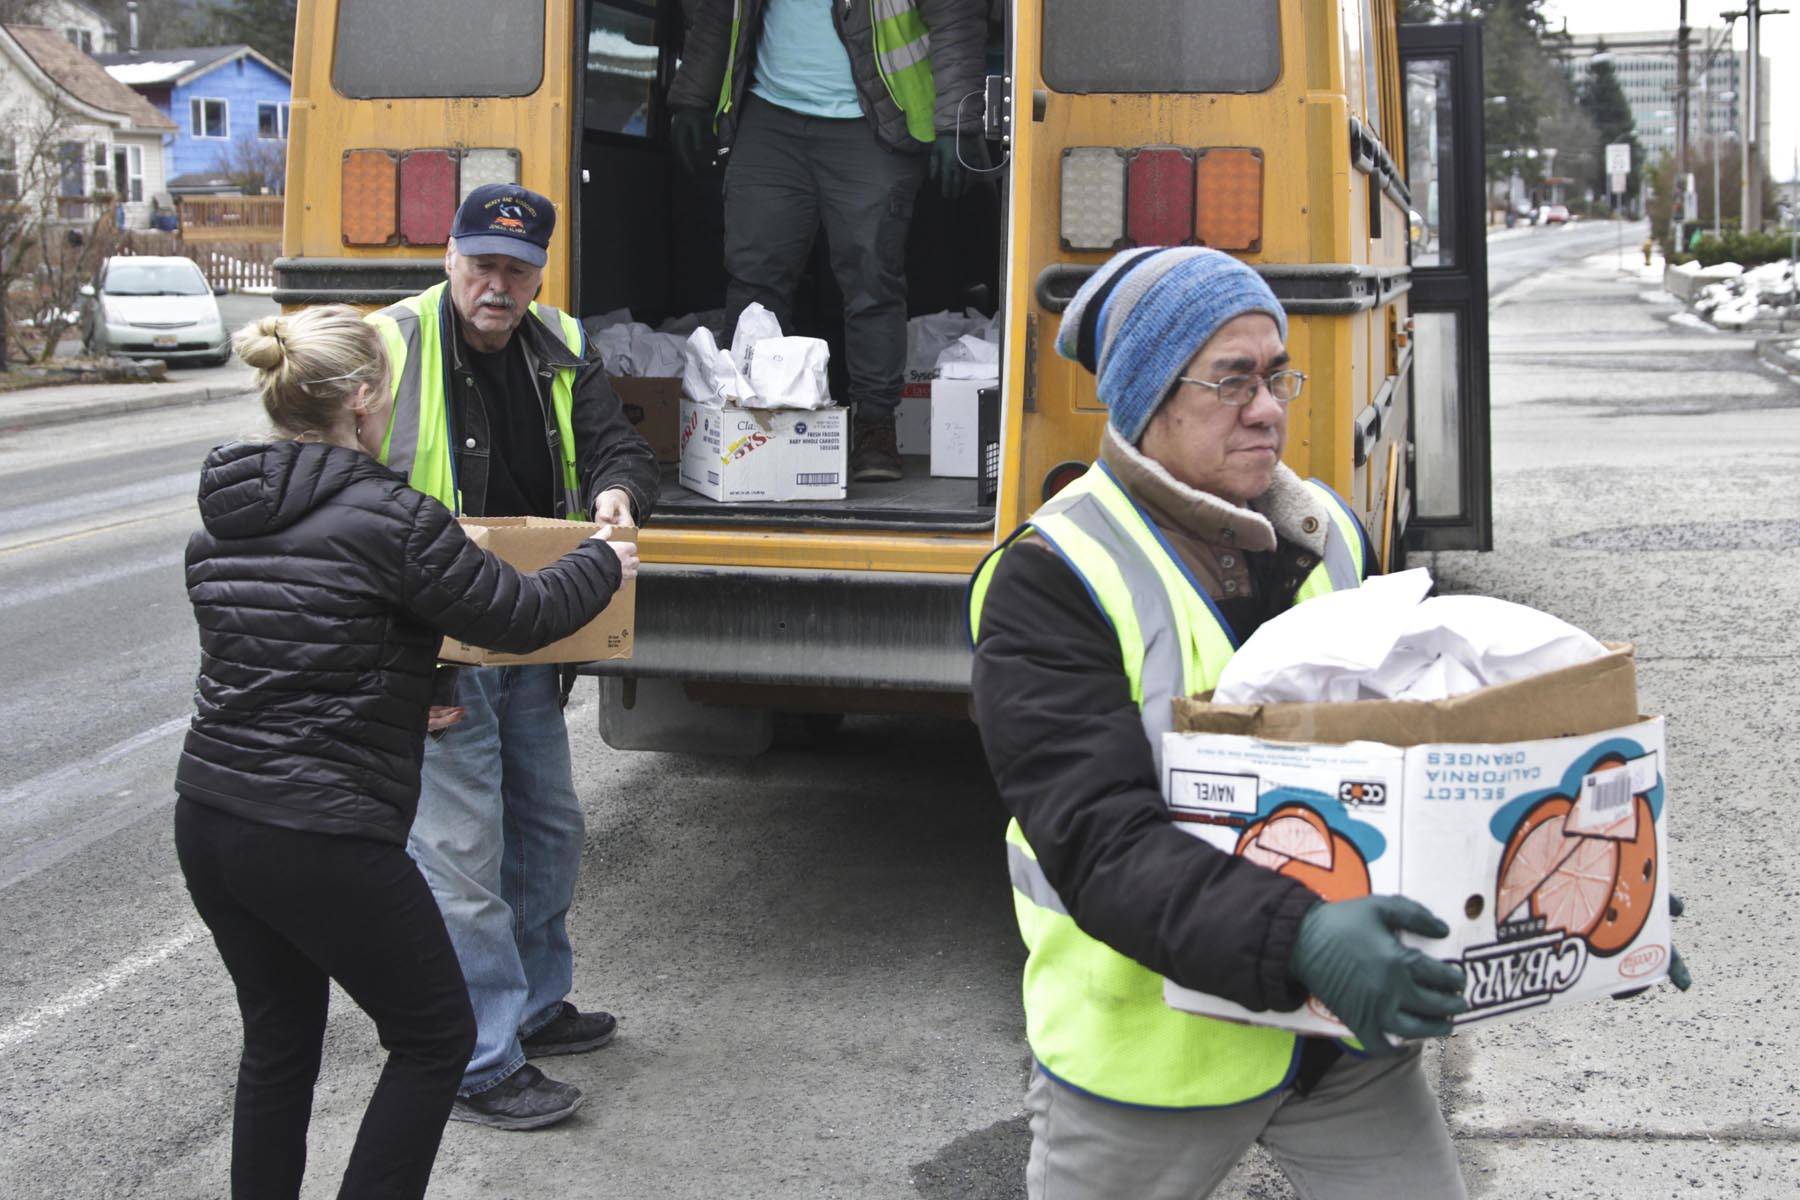 First Student employees and Juneau School District food services supervisor Adrianne Schwartz, left, carry student meals off the bus they’re being distributed from near Juneau-Douglas High School:Yadaa.at Kalé, March 16, 2020. (Michael S. Lockett / Juneau Empire File)